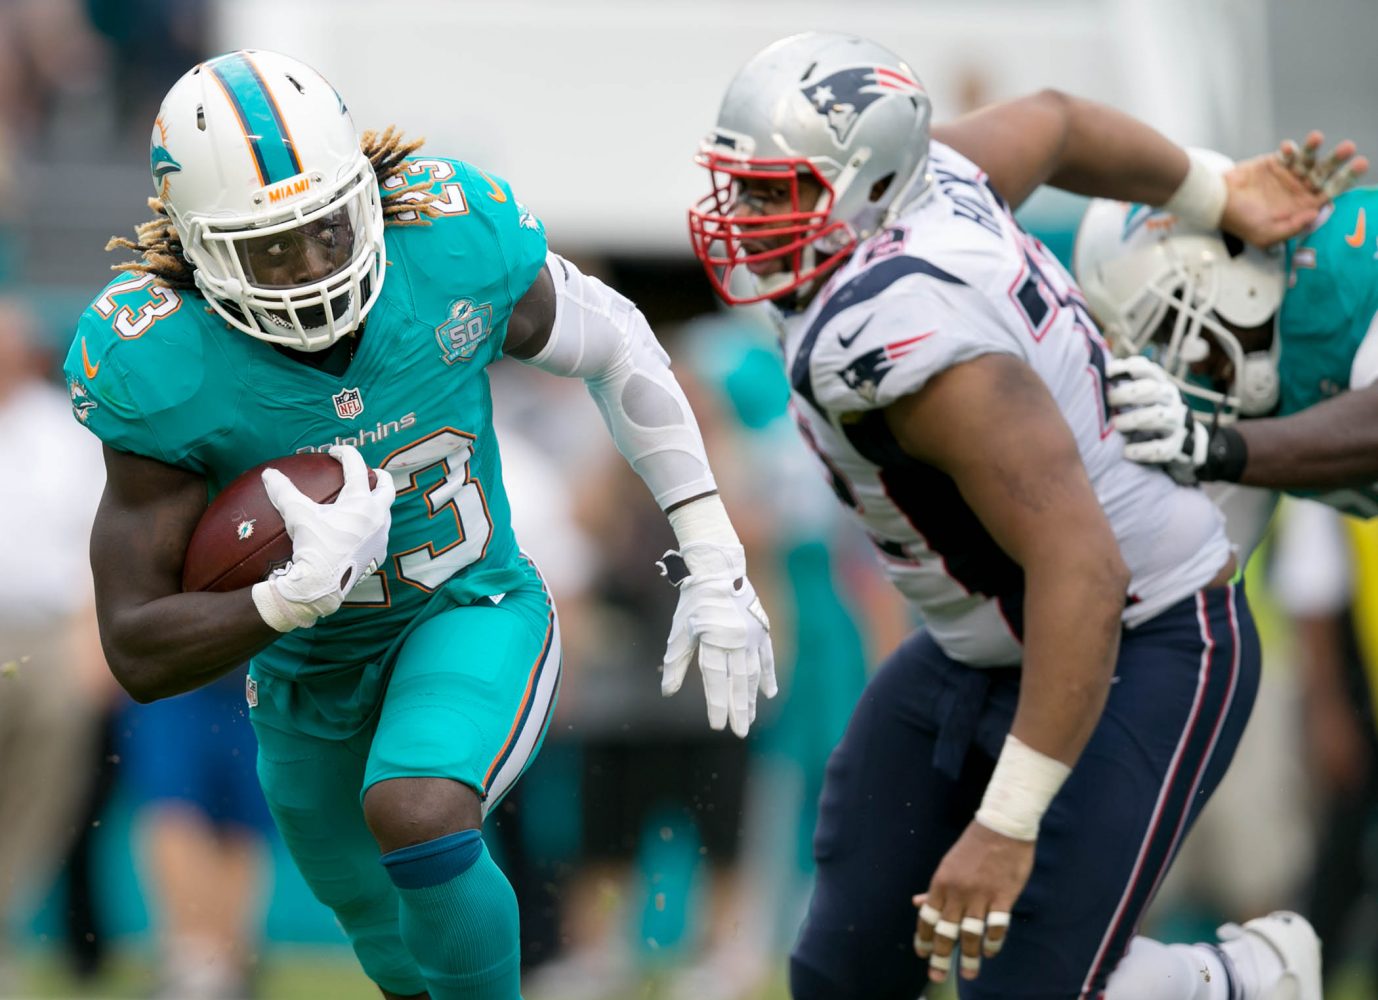 Miami+Dolphins+running+back+Jay+Ajayi+%2823%29+looks+for+running+room+against+the+Patriots+at+Sun+Life+Stadium+in+Miami+Gardens%2C+Florida+on+January+3%2C+2016.+%28Allen+Eyestone+%2F+The+Palm+Beach+Post%29